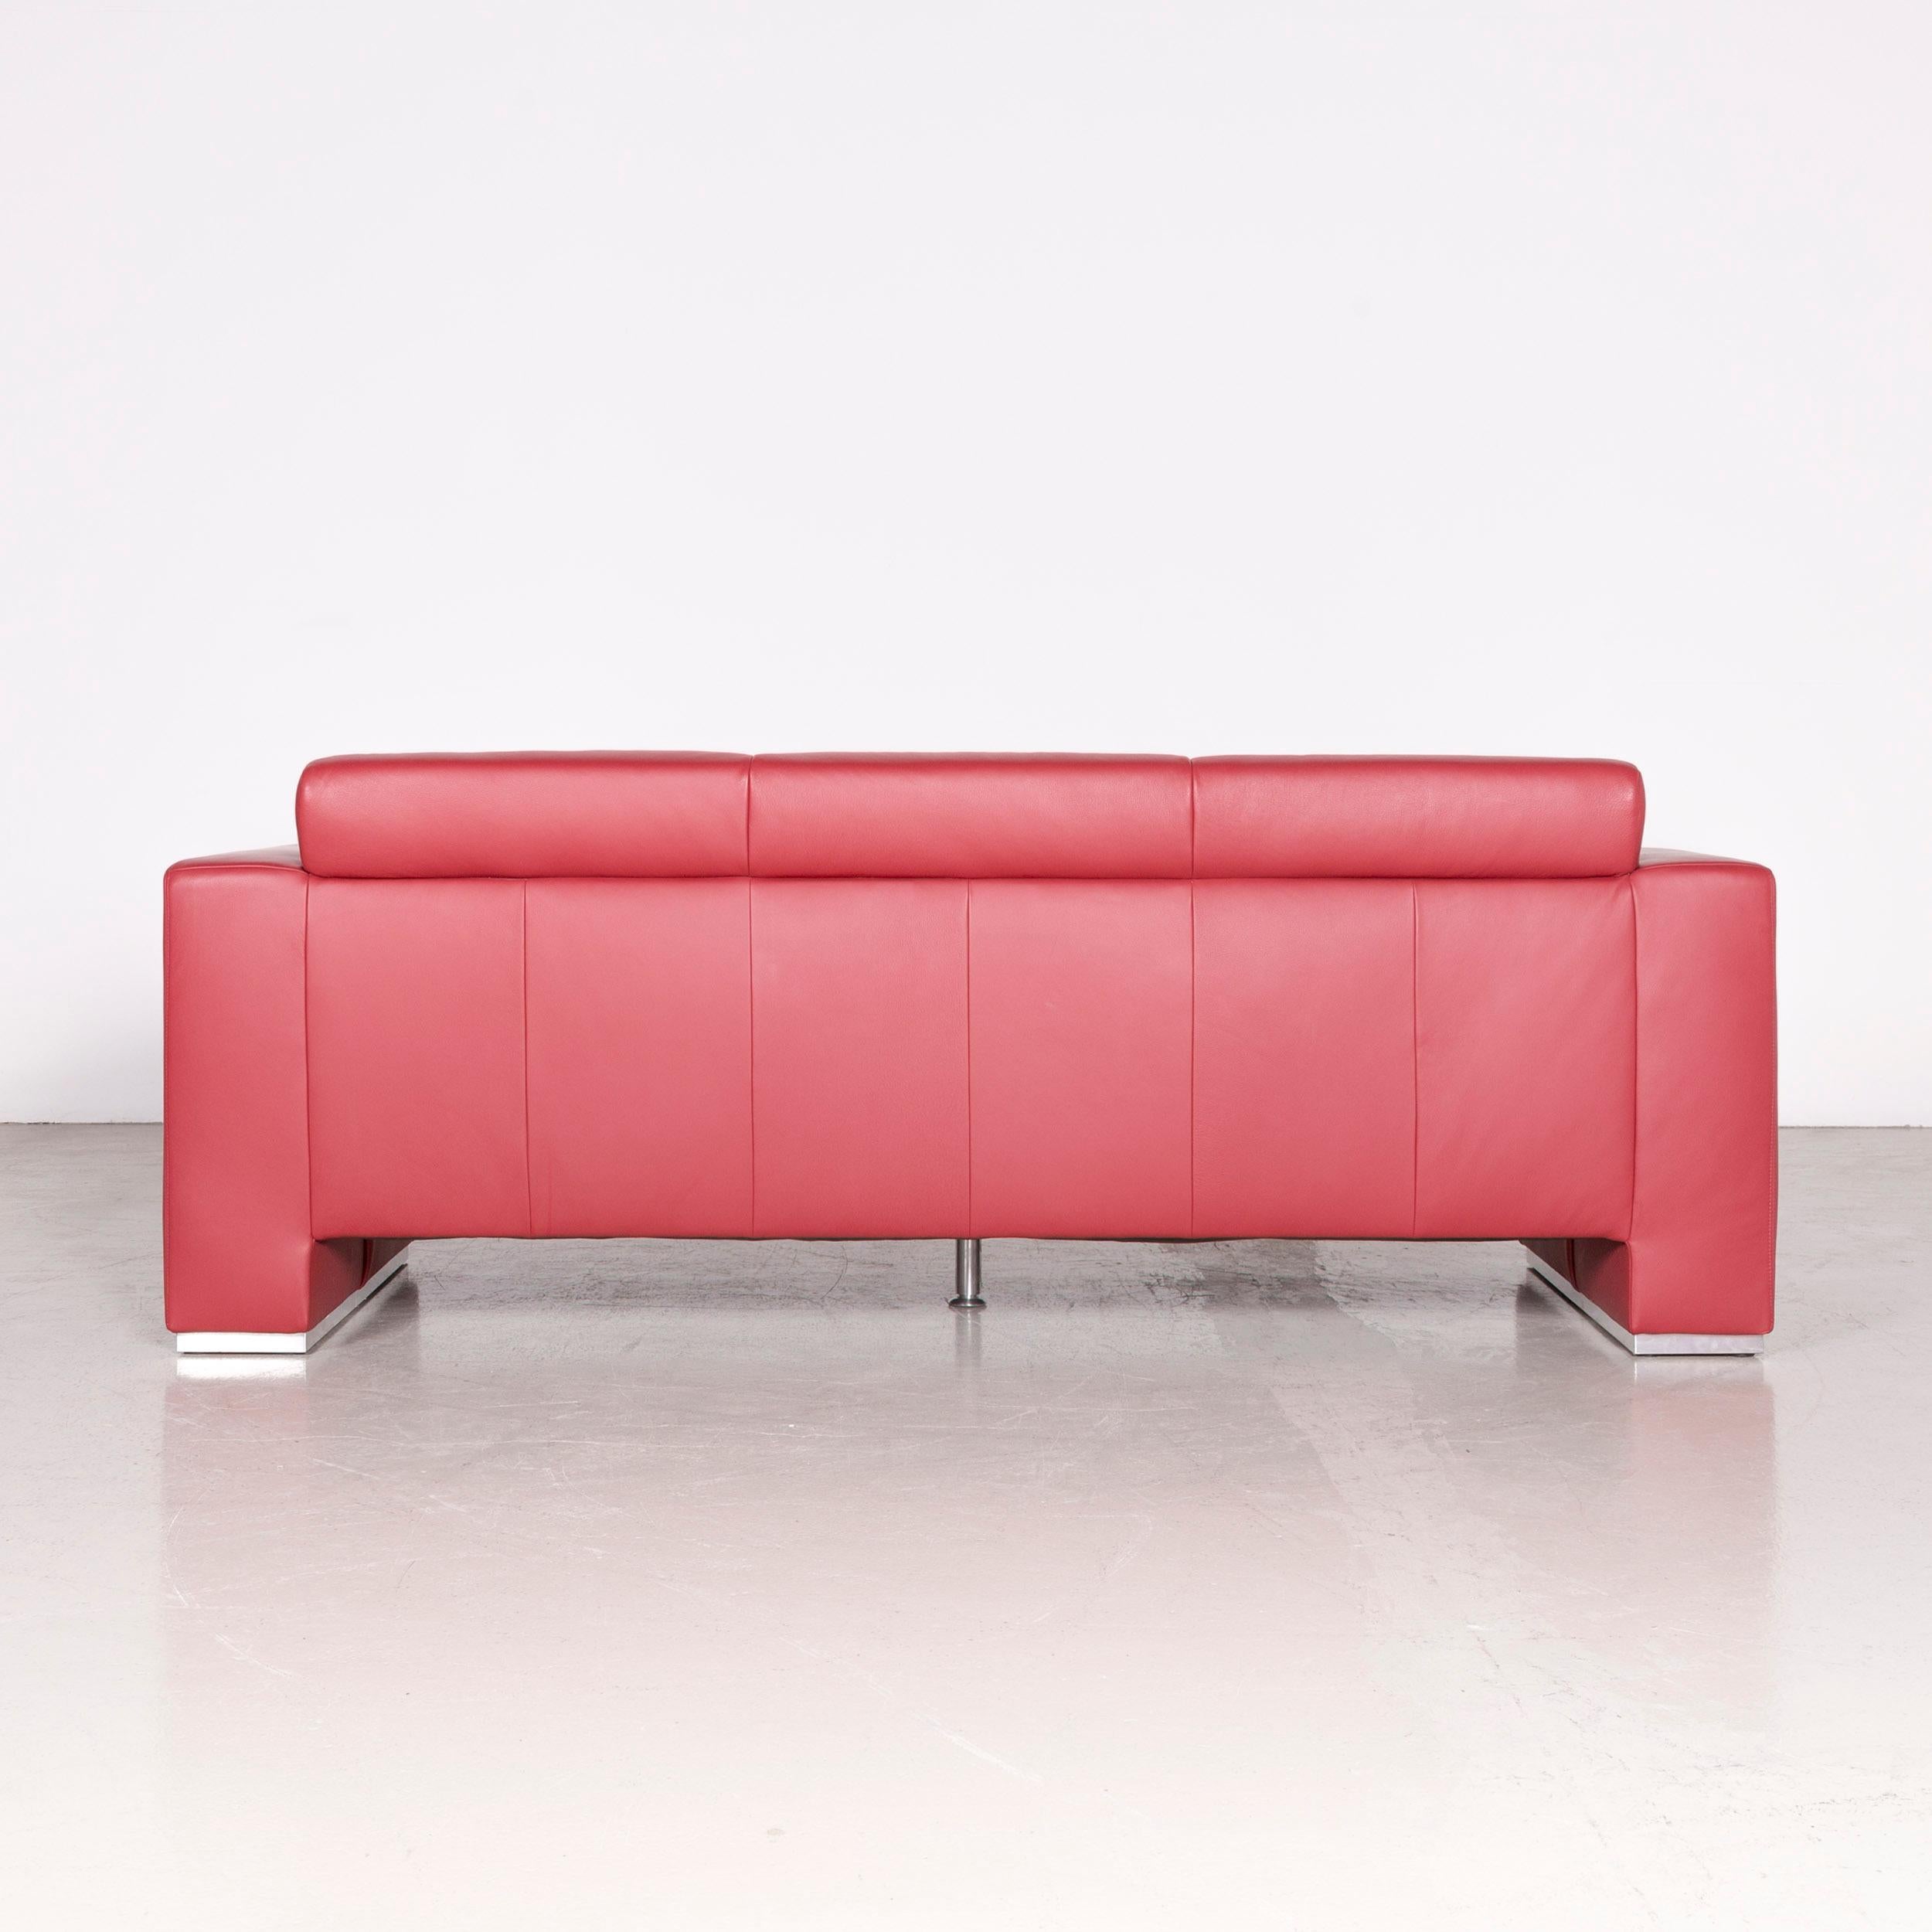 Koinor Nove Designer Leather Sofa Red Two-Seat Couch 2